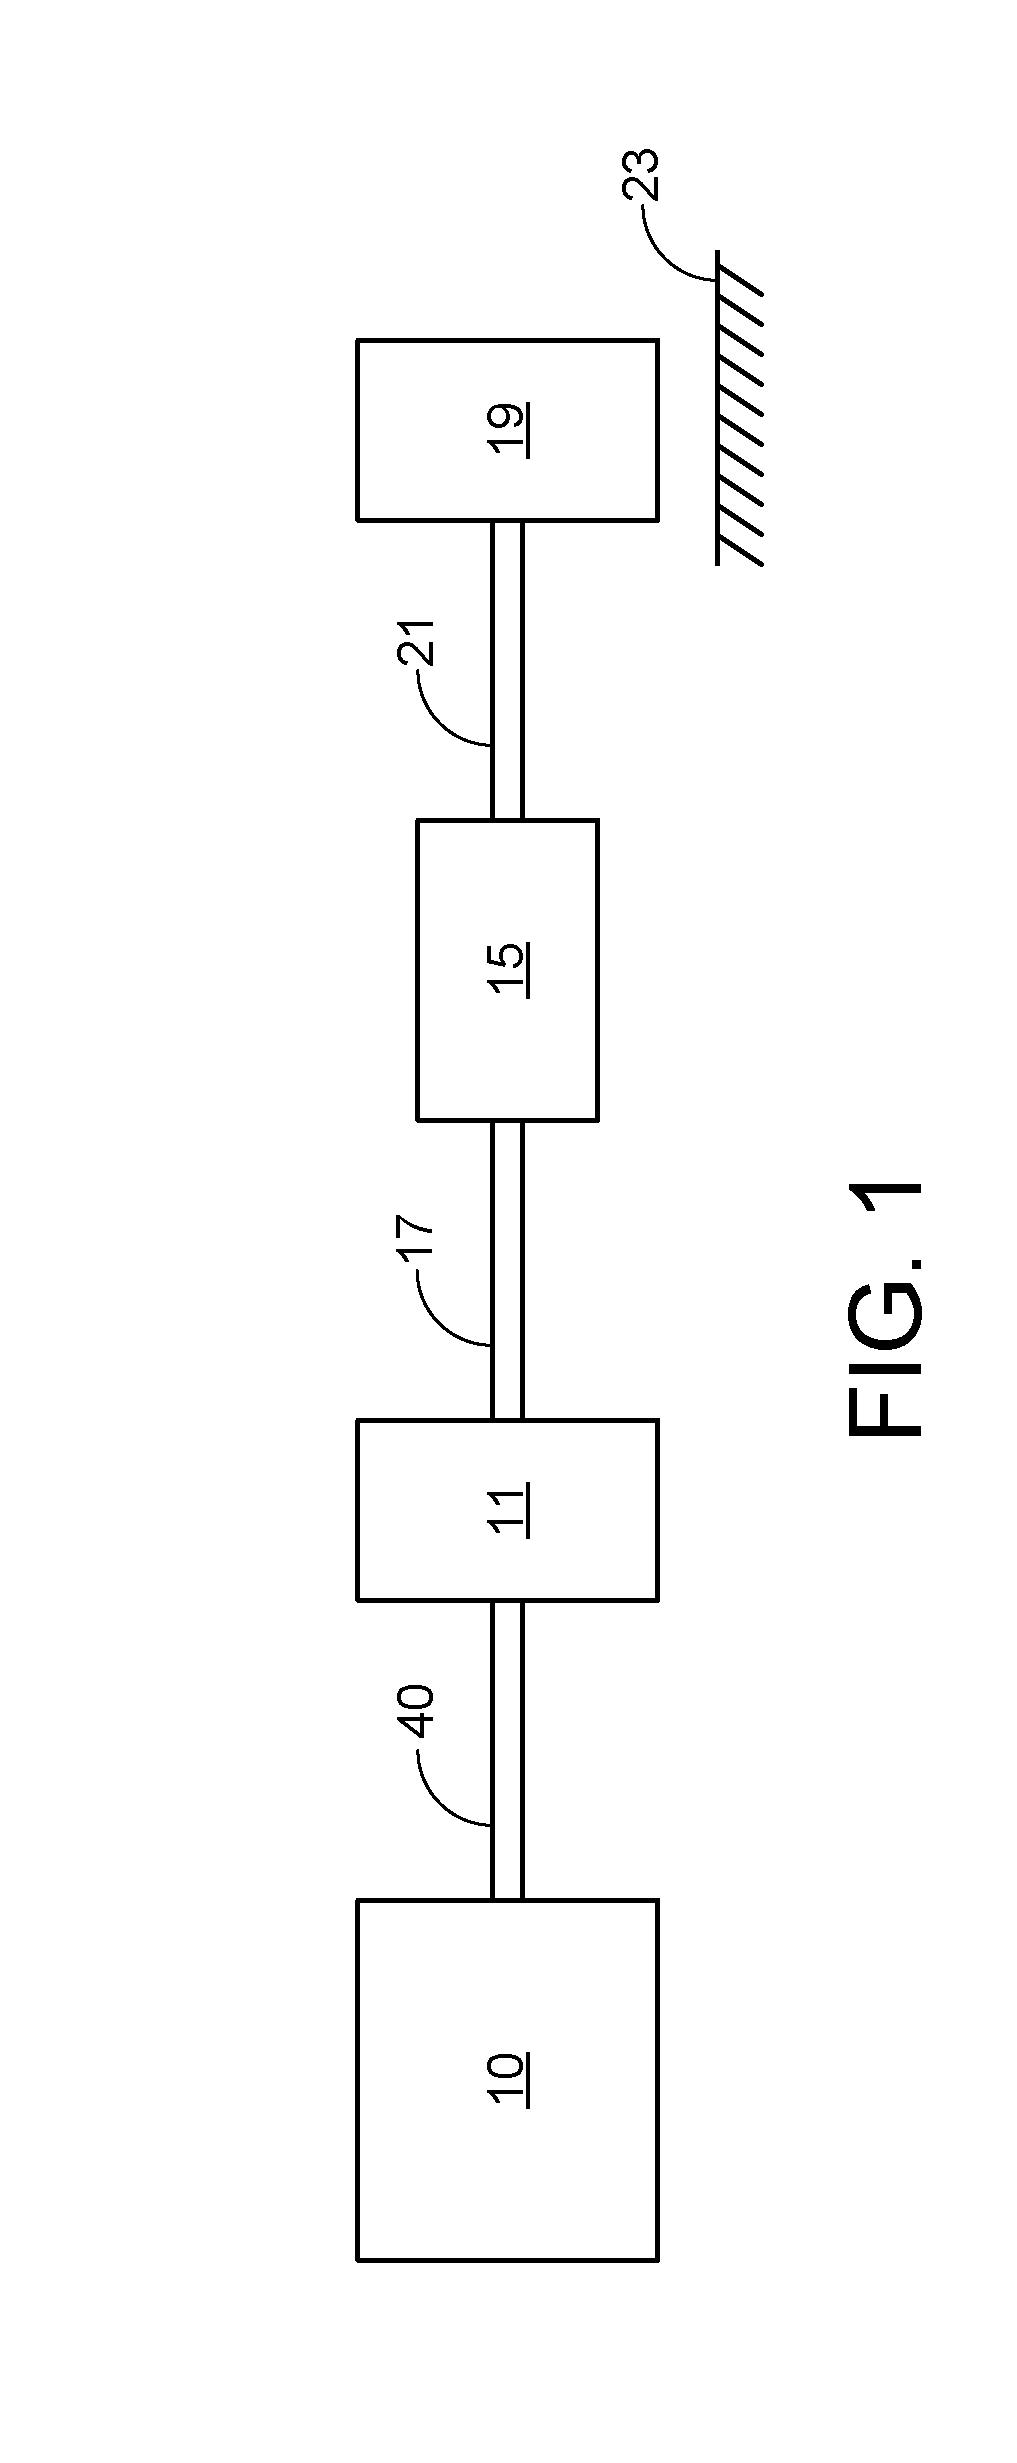 Method for controlling an engine during a restart